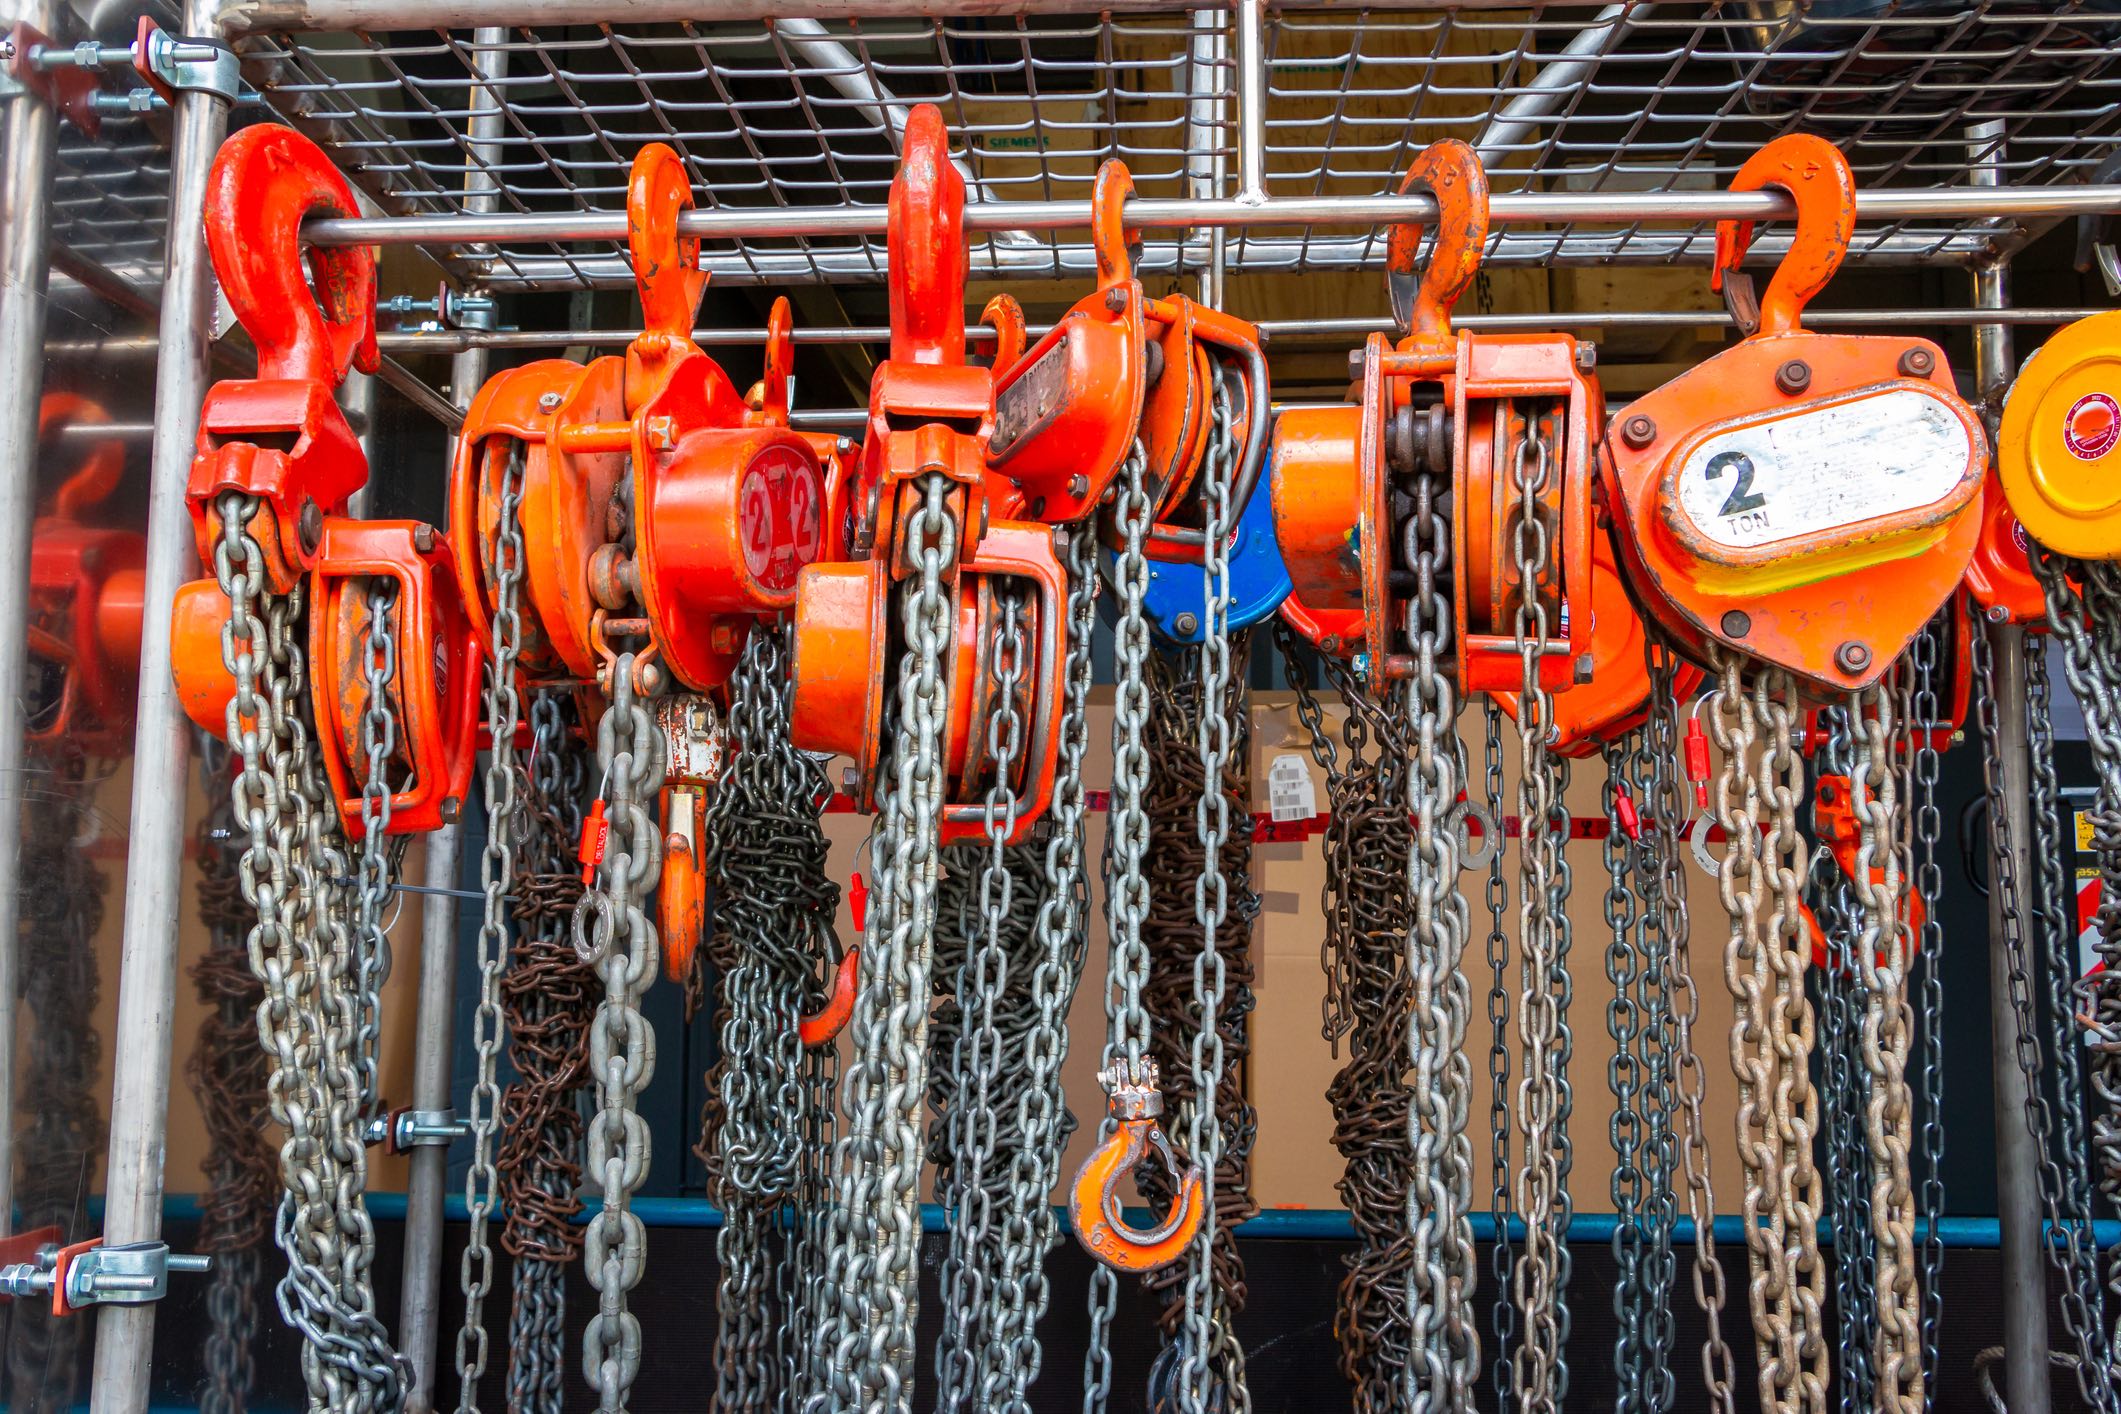 How to Ship Industrial Rigging Equipment